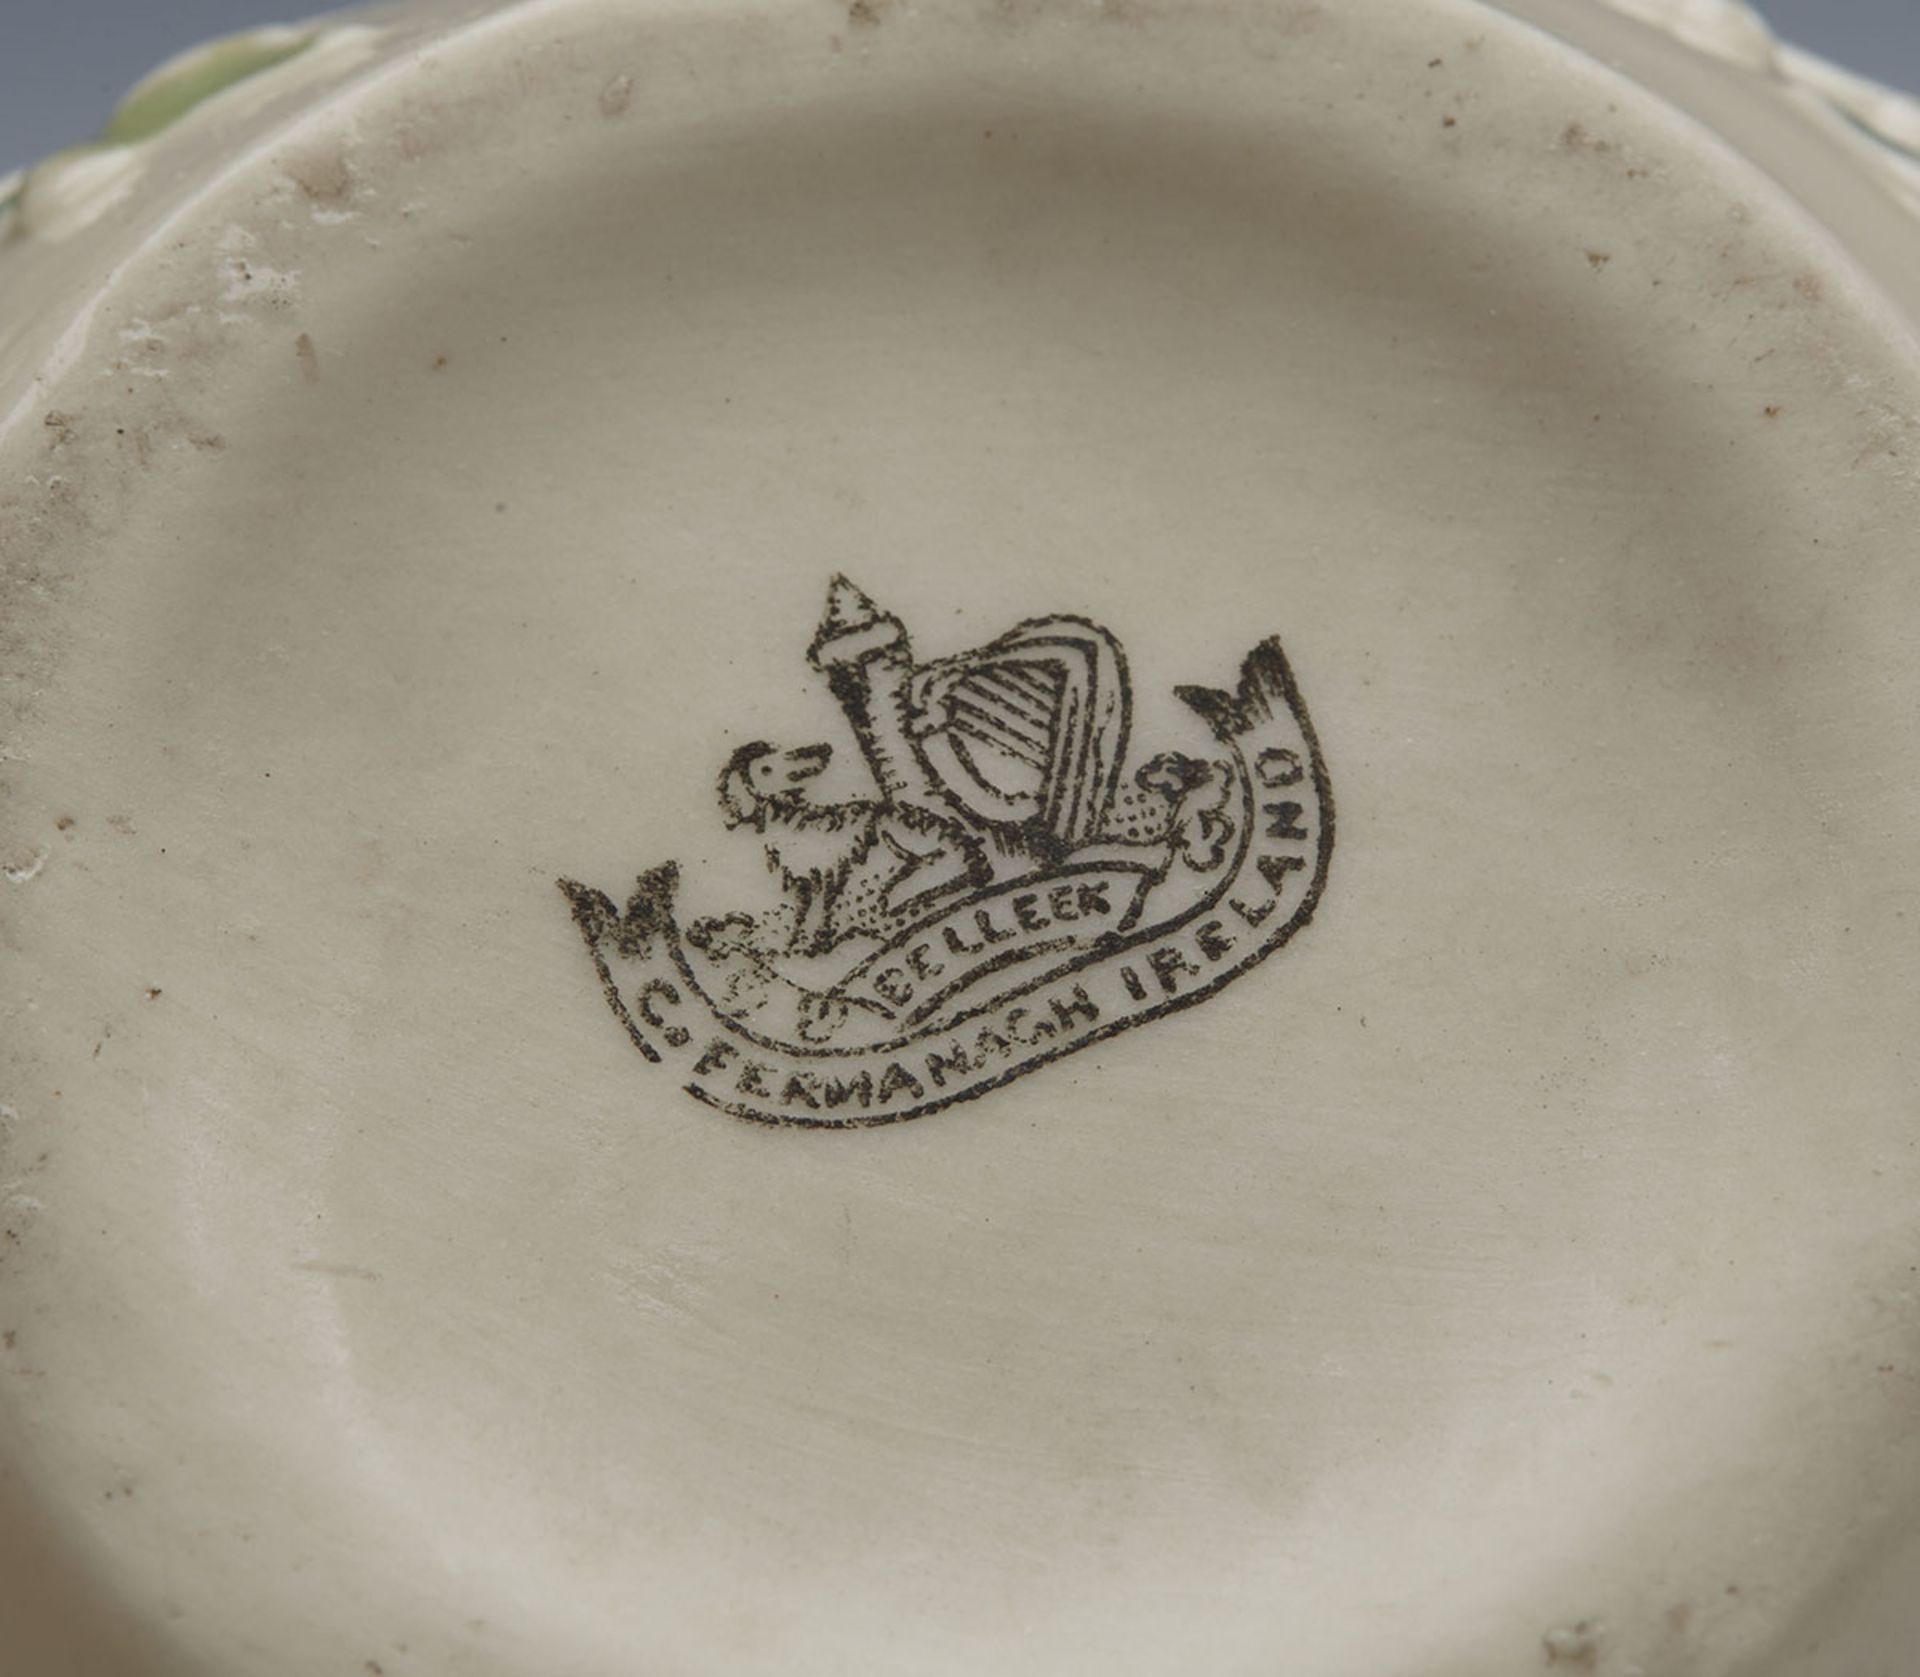 ANTIQUE BELLEEK 2ND PERIOD LUSTRE GLAZED BOWL 1891-1926   DIMENSIONS   Height 5,5cm, Width 12, - Image 6 of 7